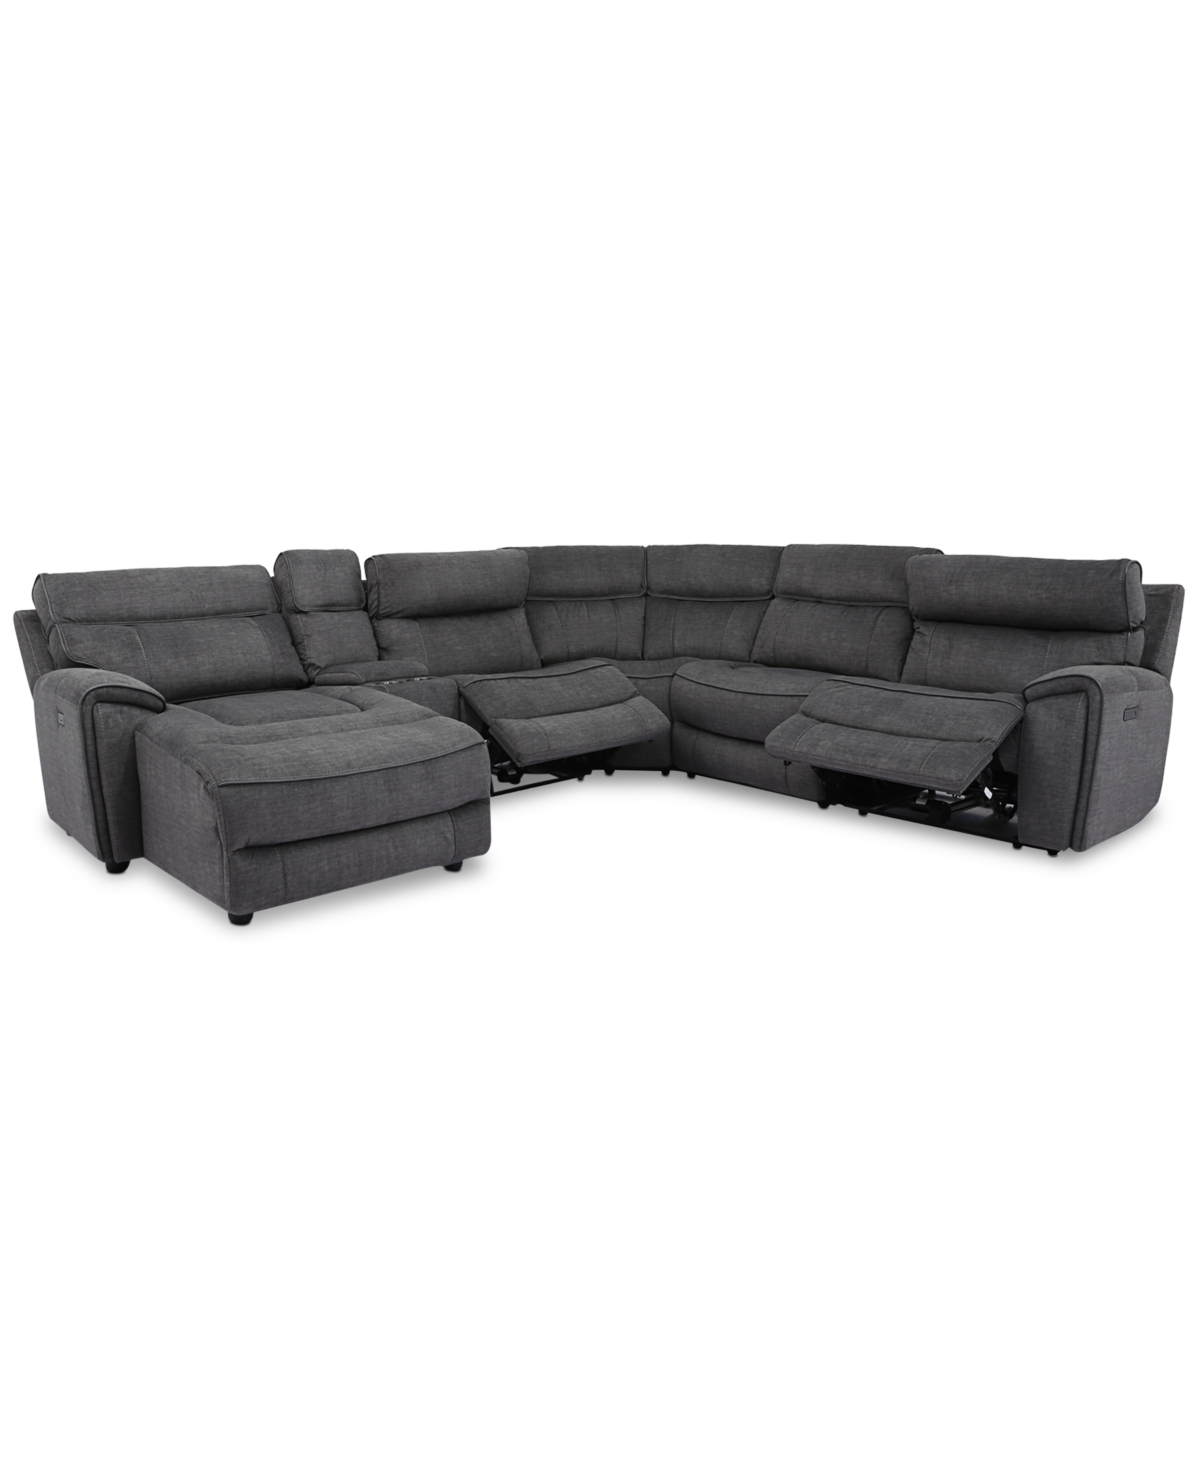 Furniture Hutchenson 6-pc. Fabric Chaise Sectional With 2 Power Recliners And Console In Charcoal Moss